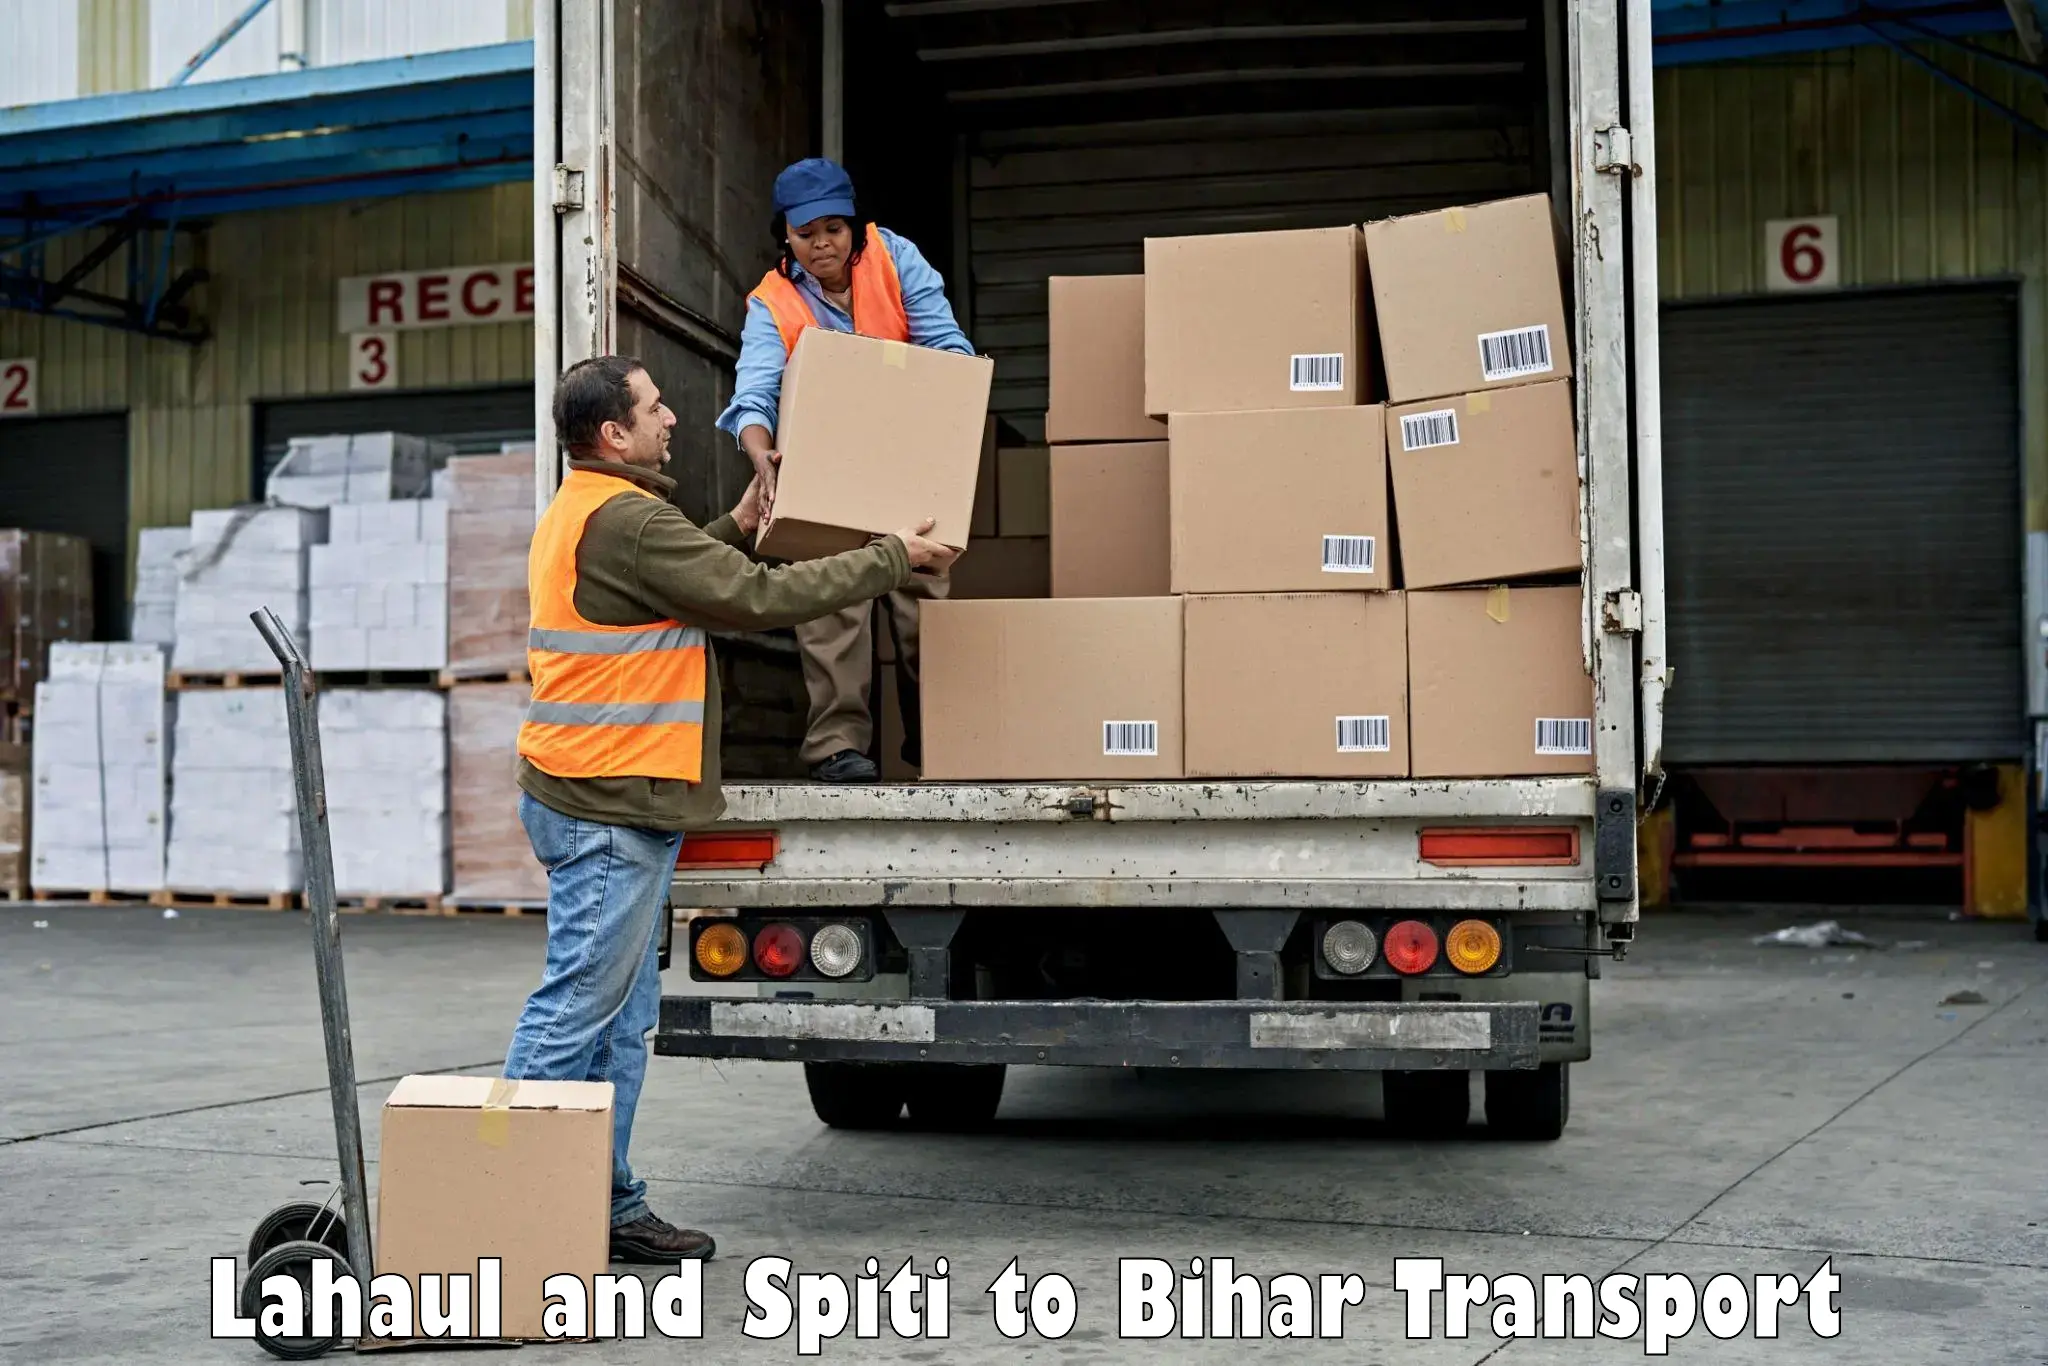 Air cargo transport services Lahaul and Spiti to Sugauna